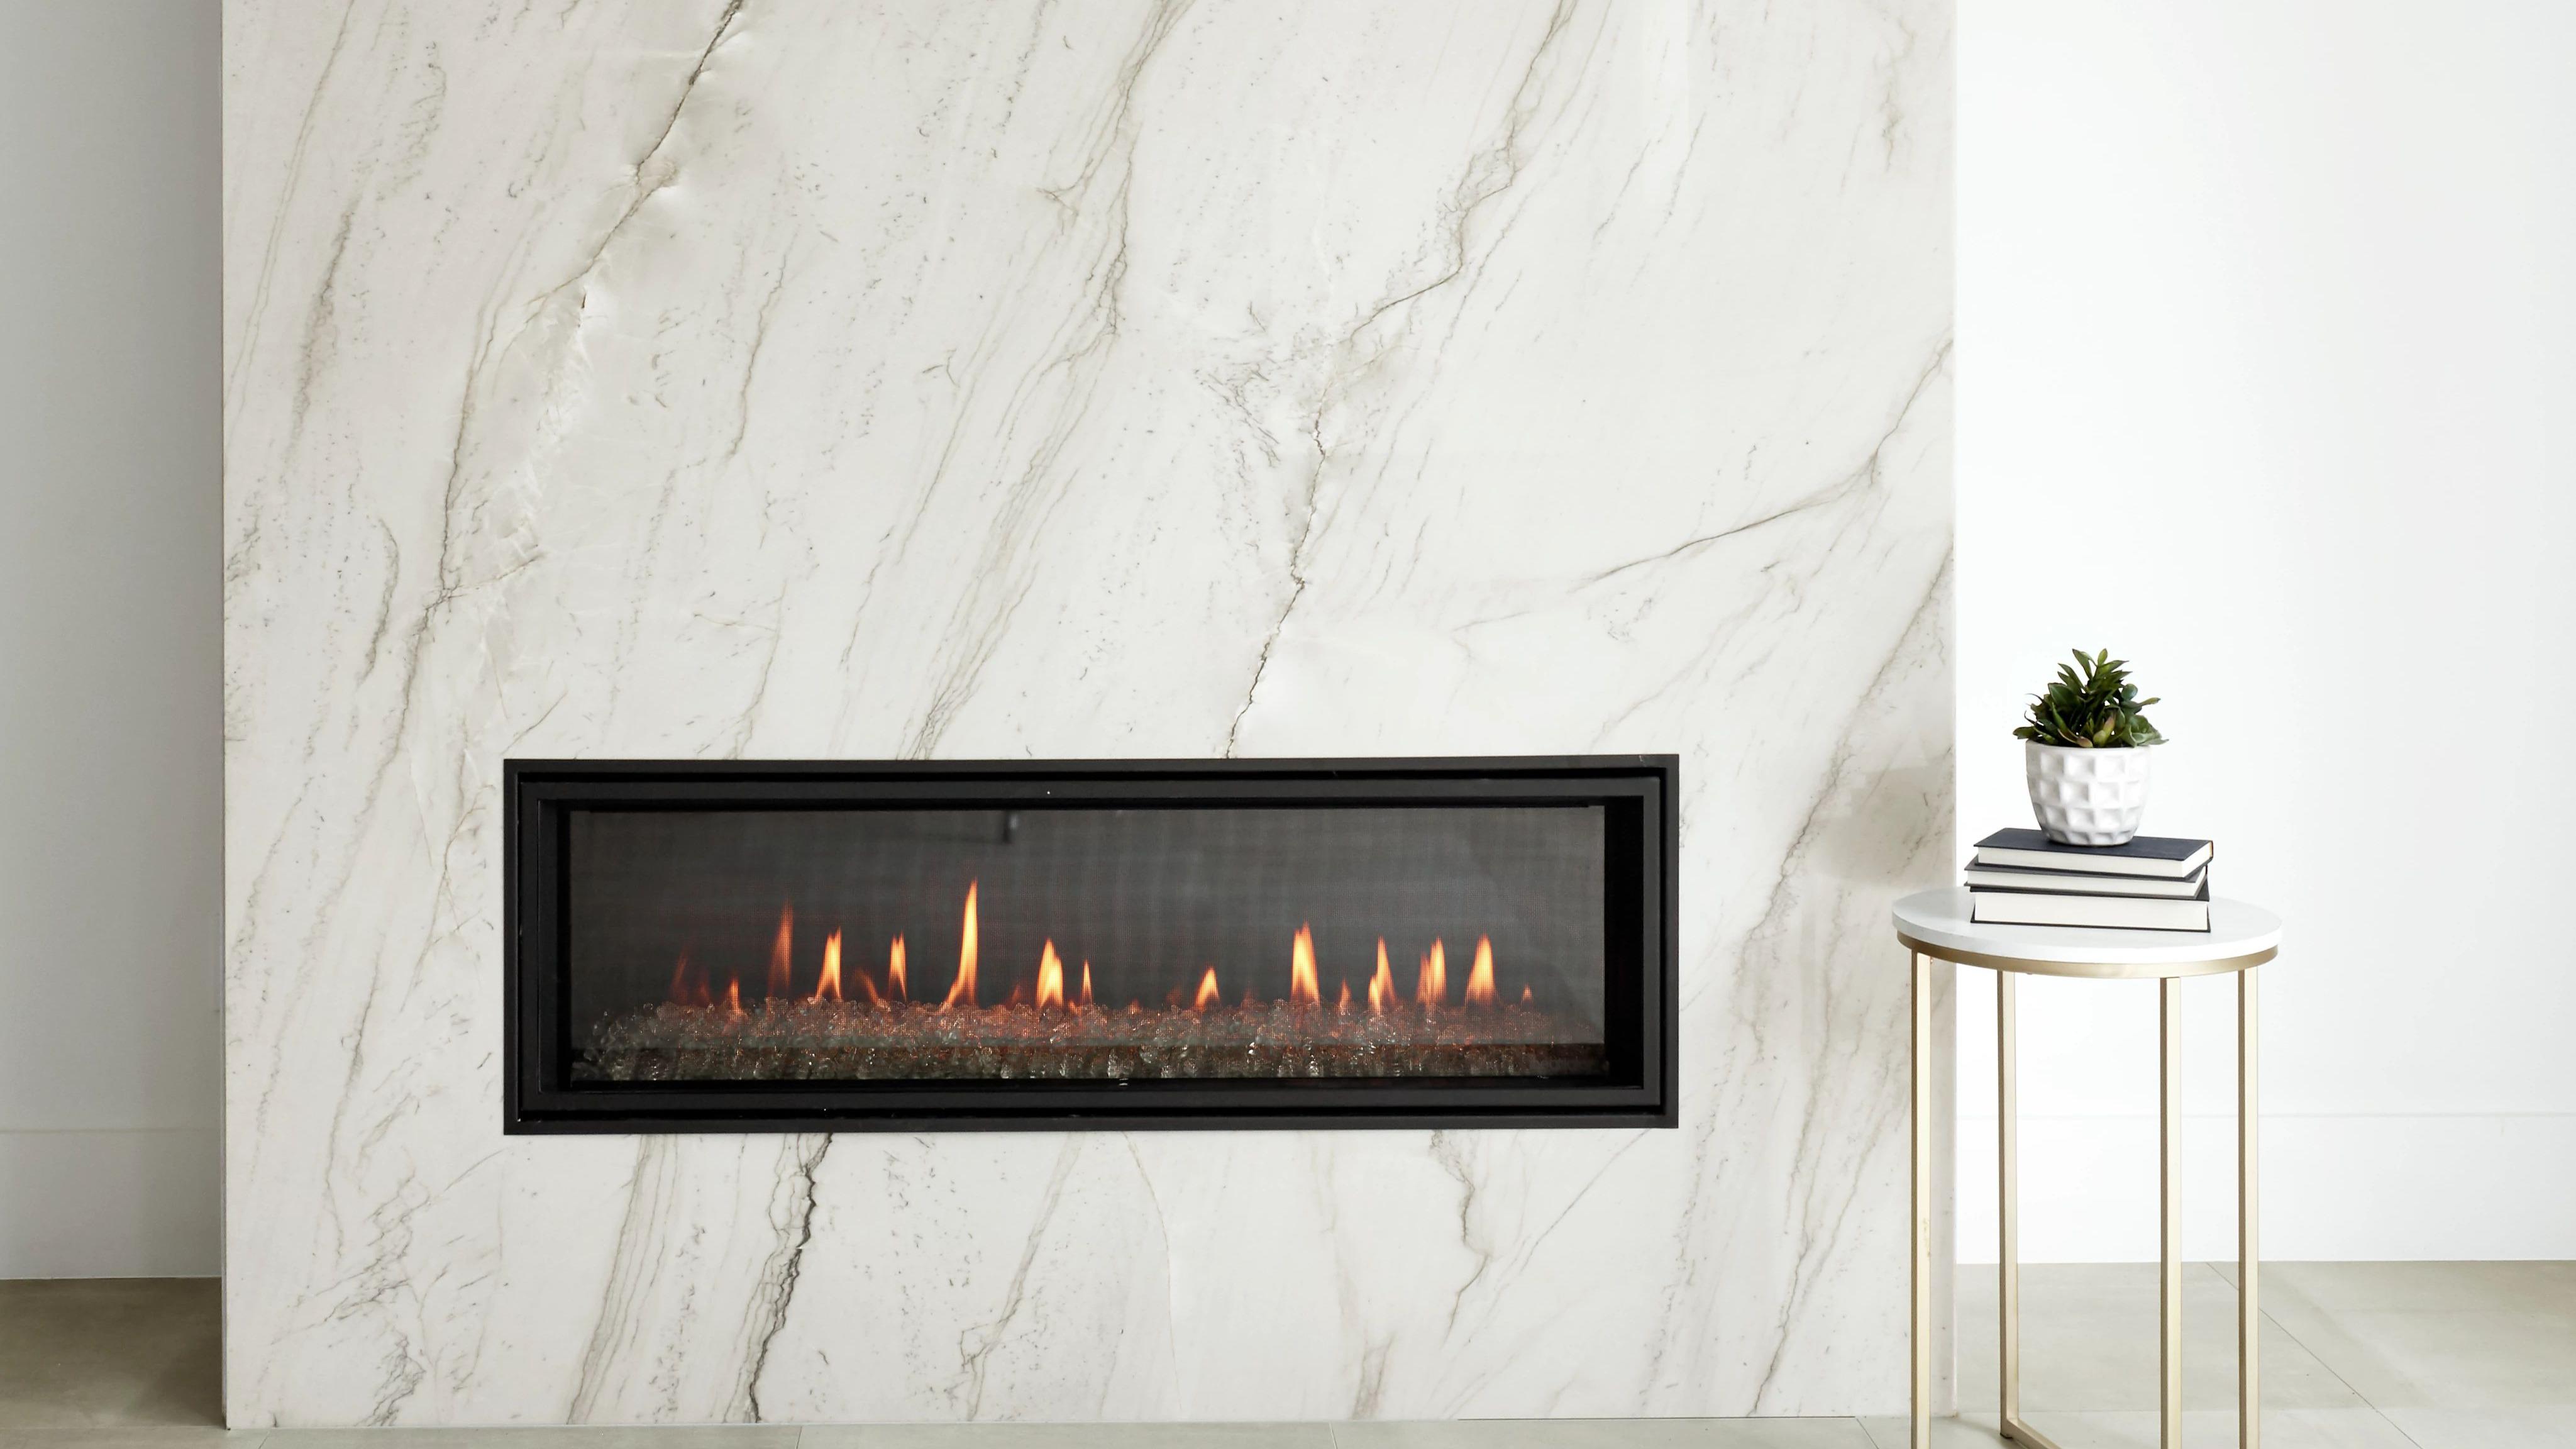 Mont Blanc Fireplace from Arizona Tile